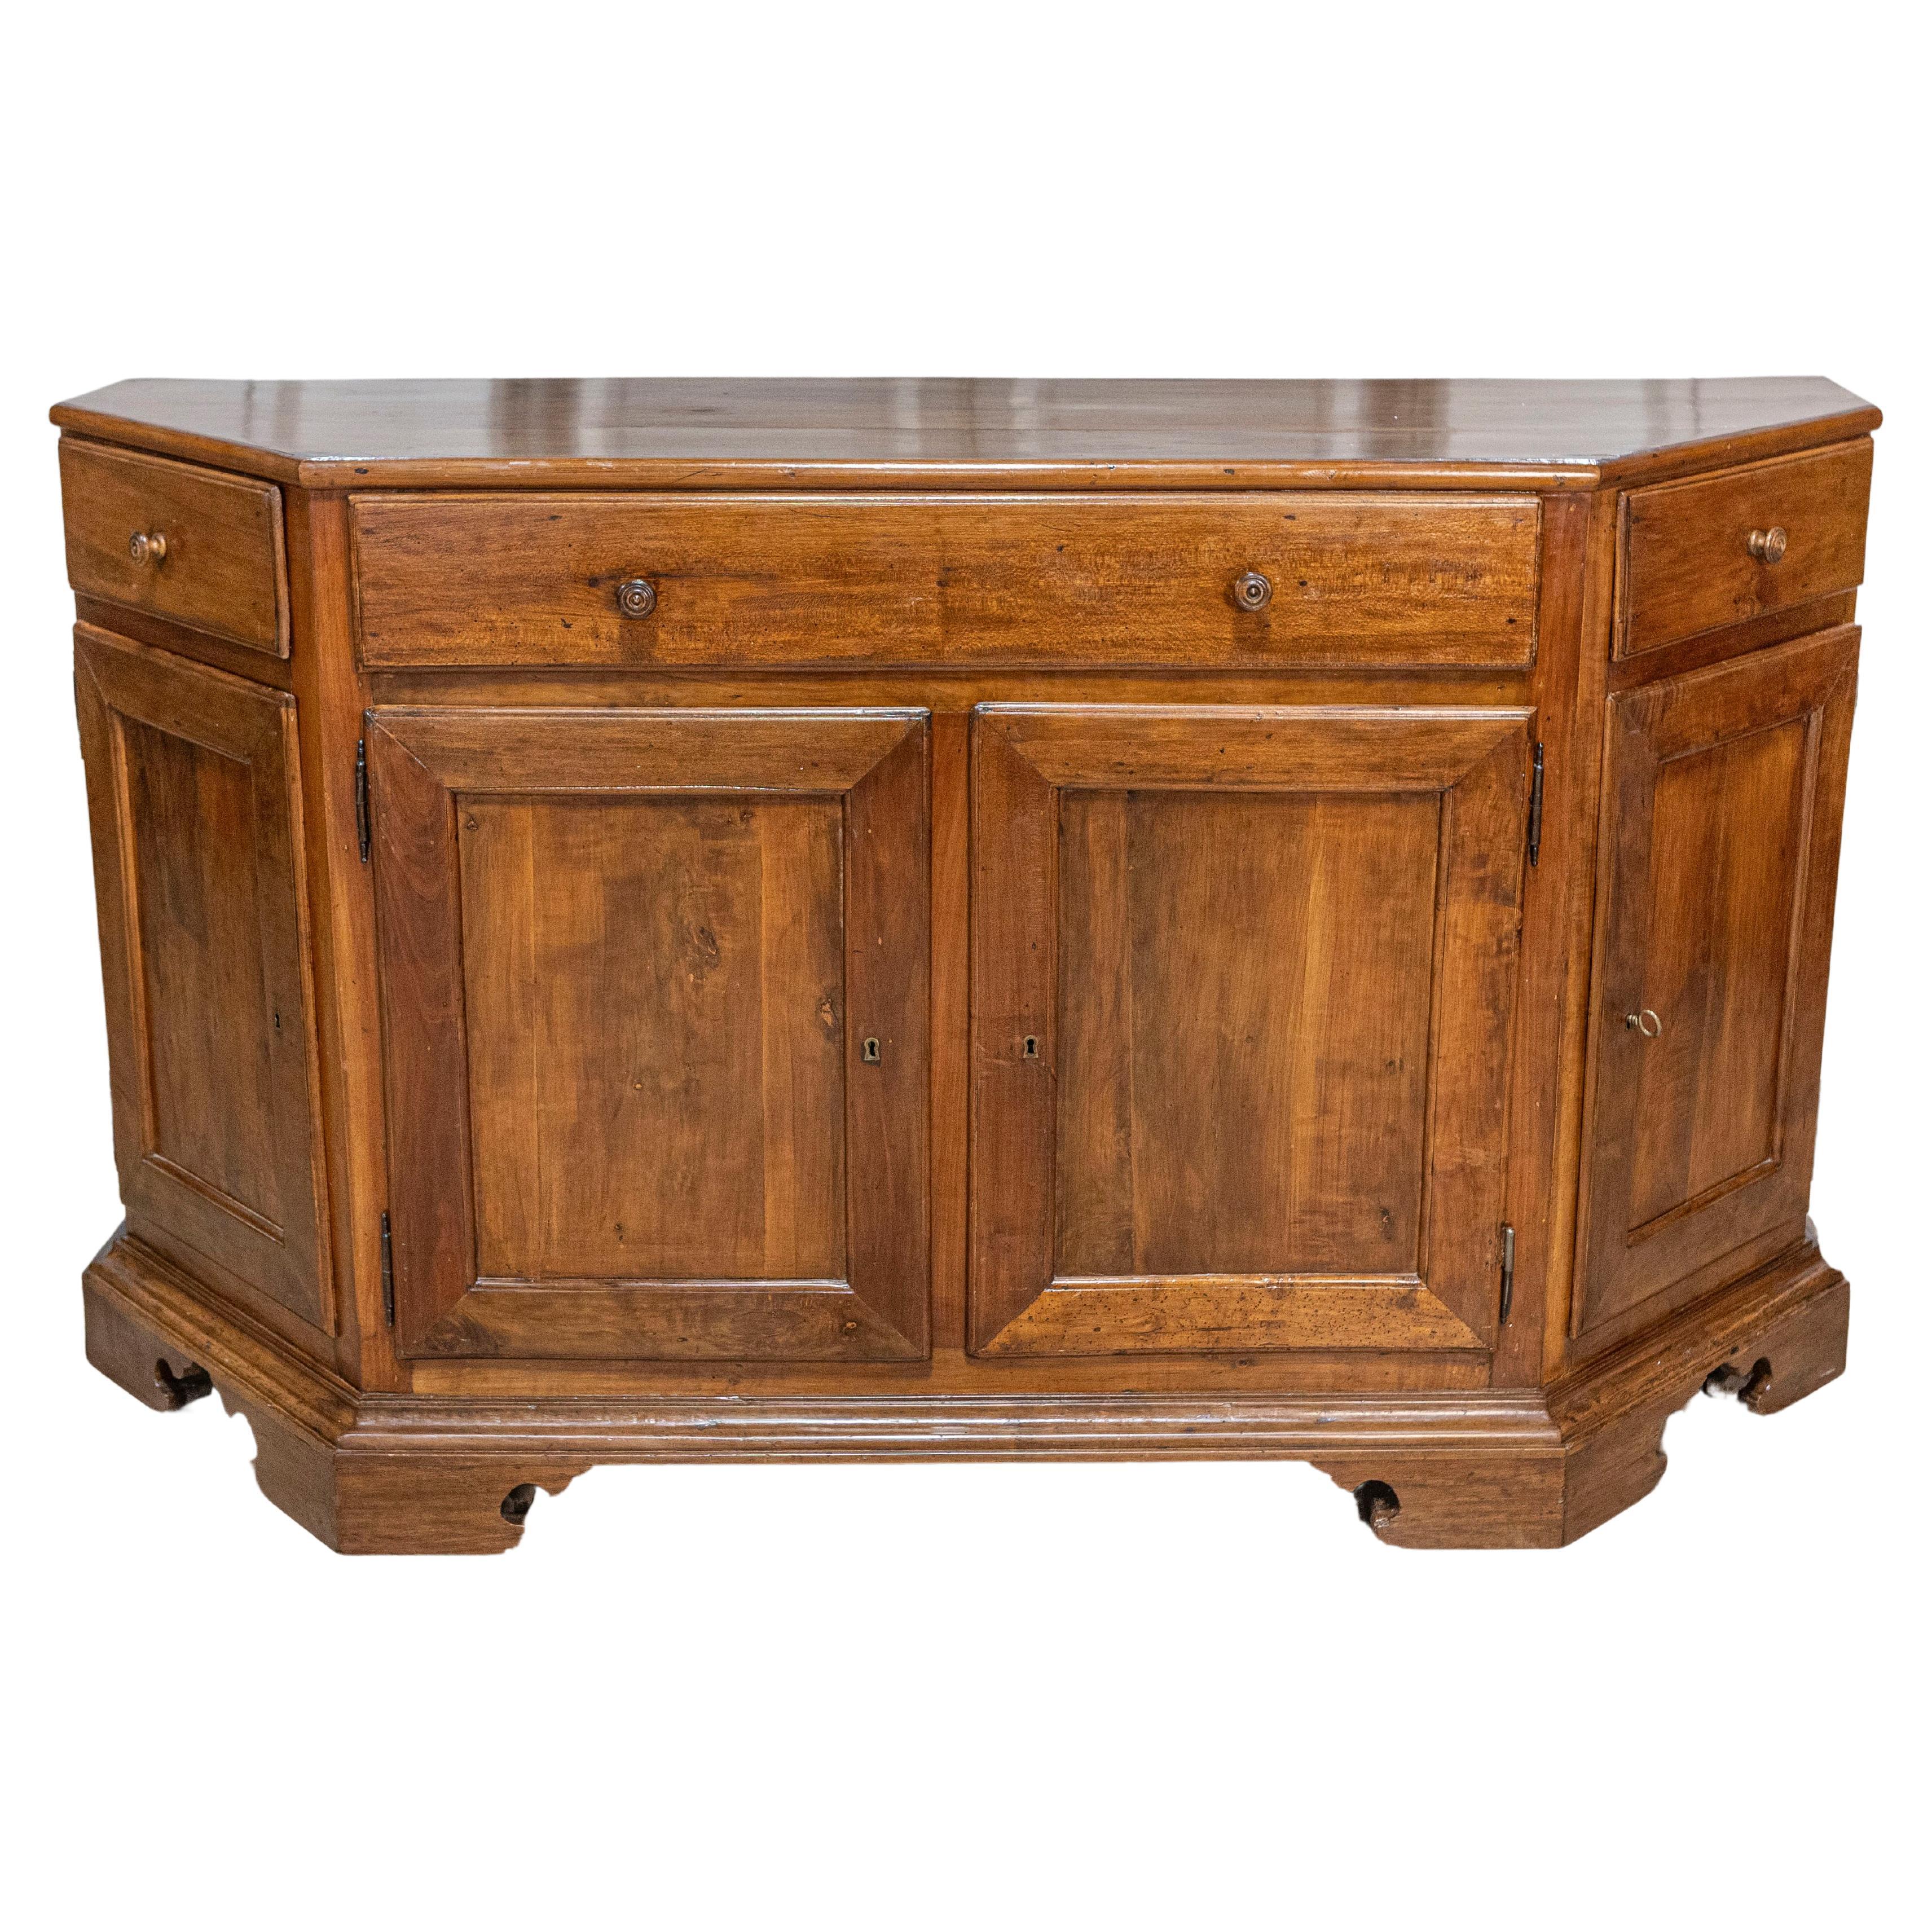 Italian 19th Century Walnut Credenza with Drawers over Doors and Canted Sides For Sale